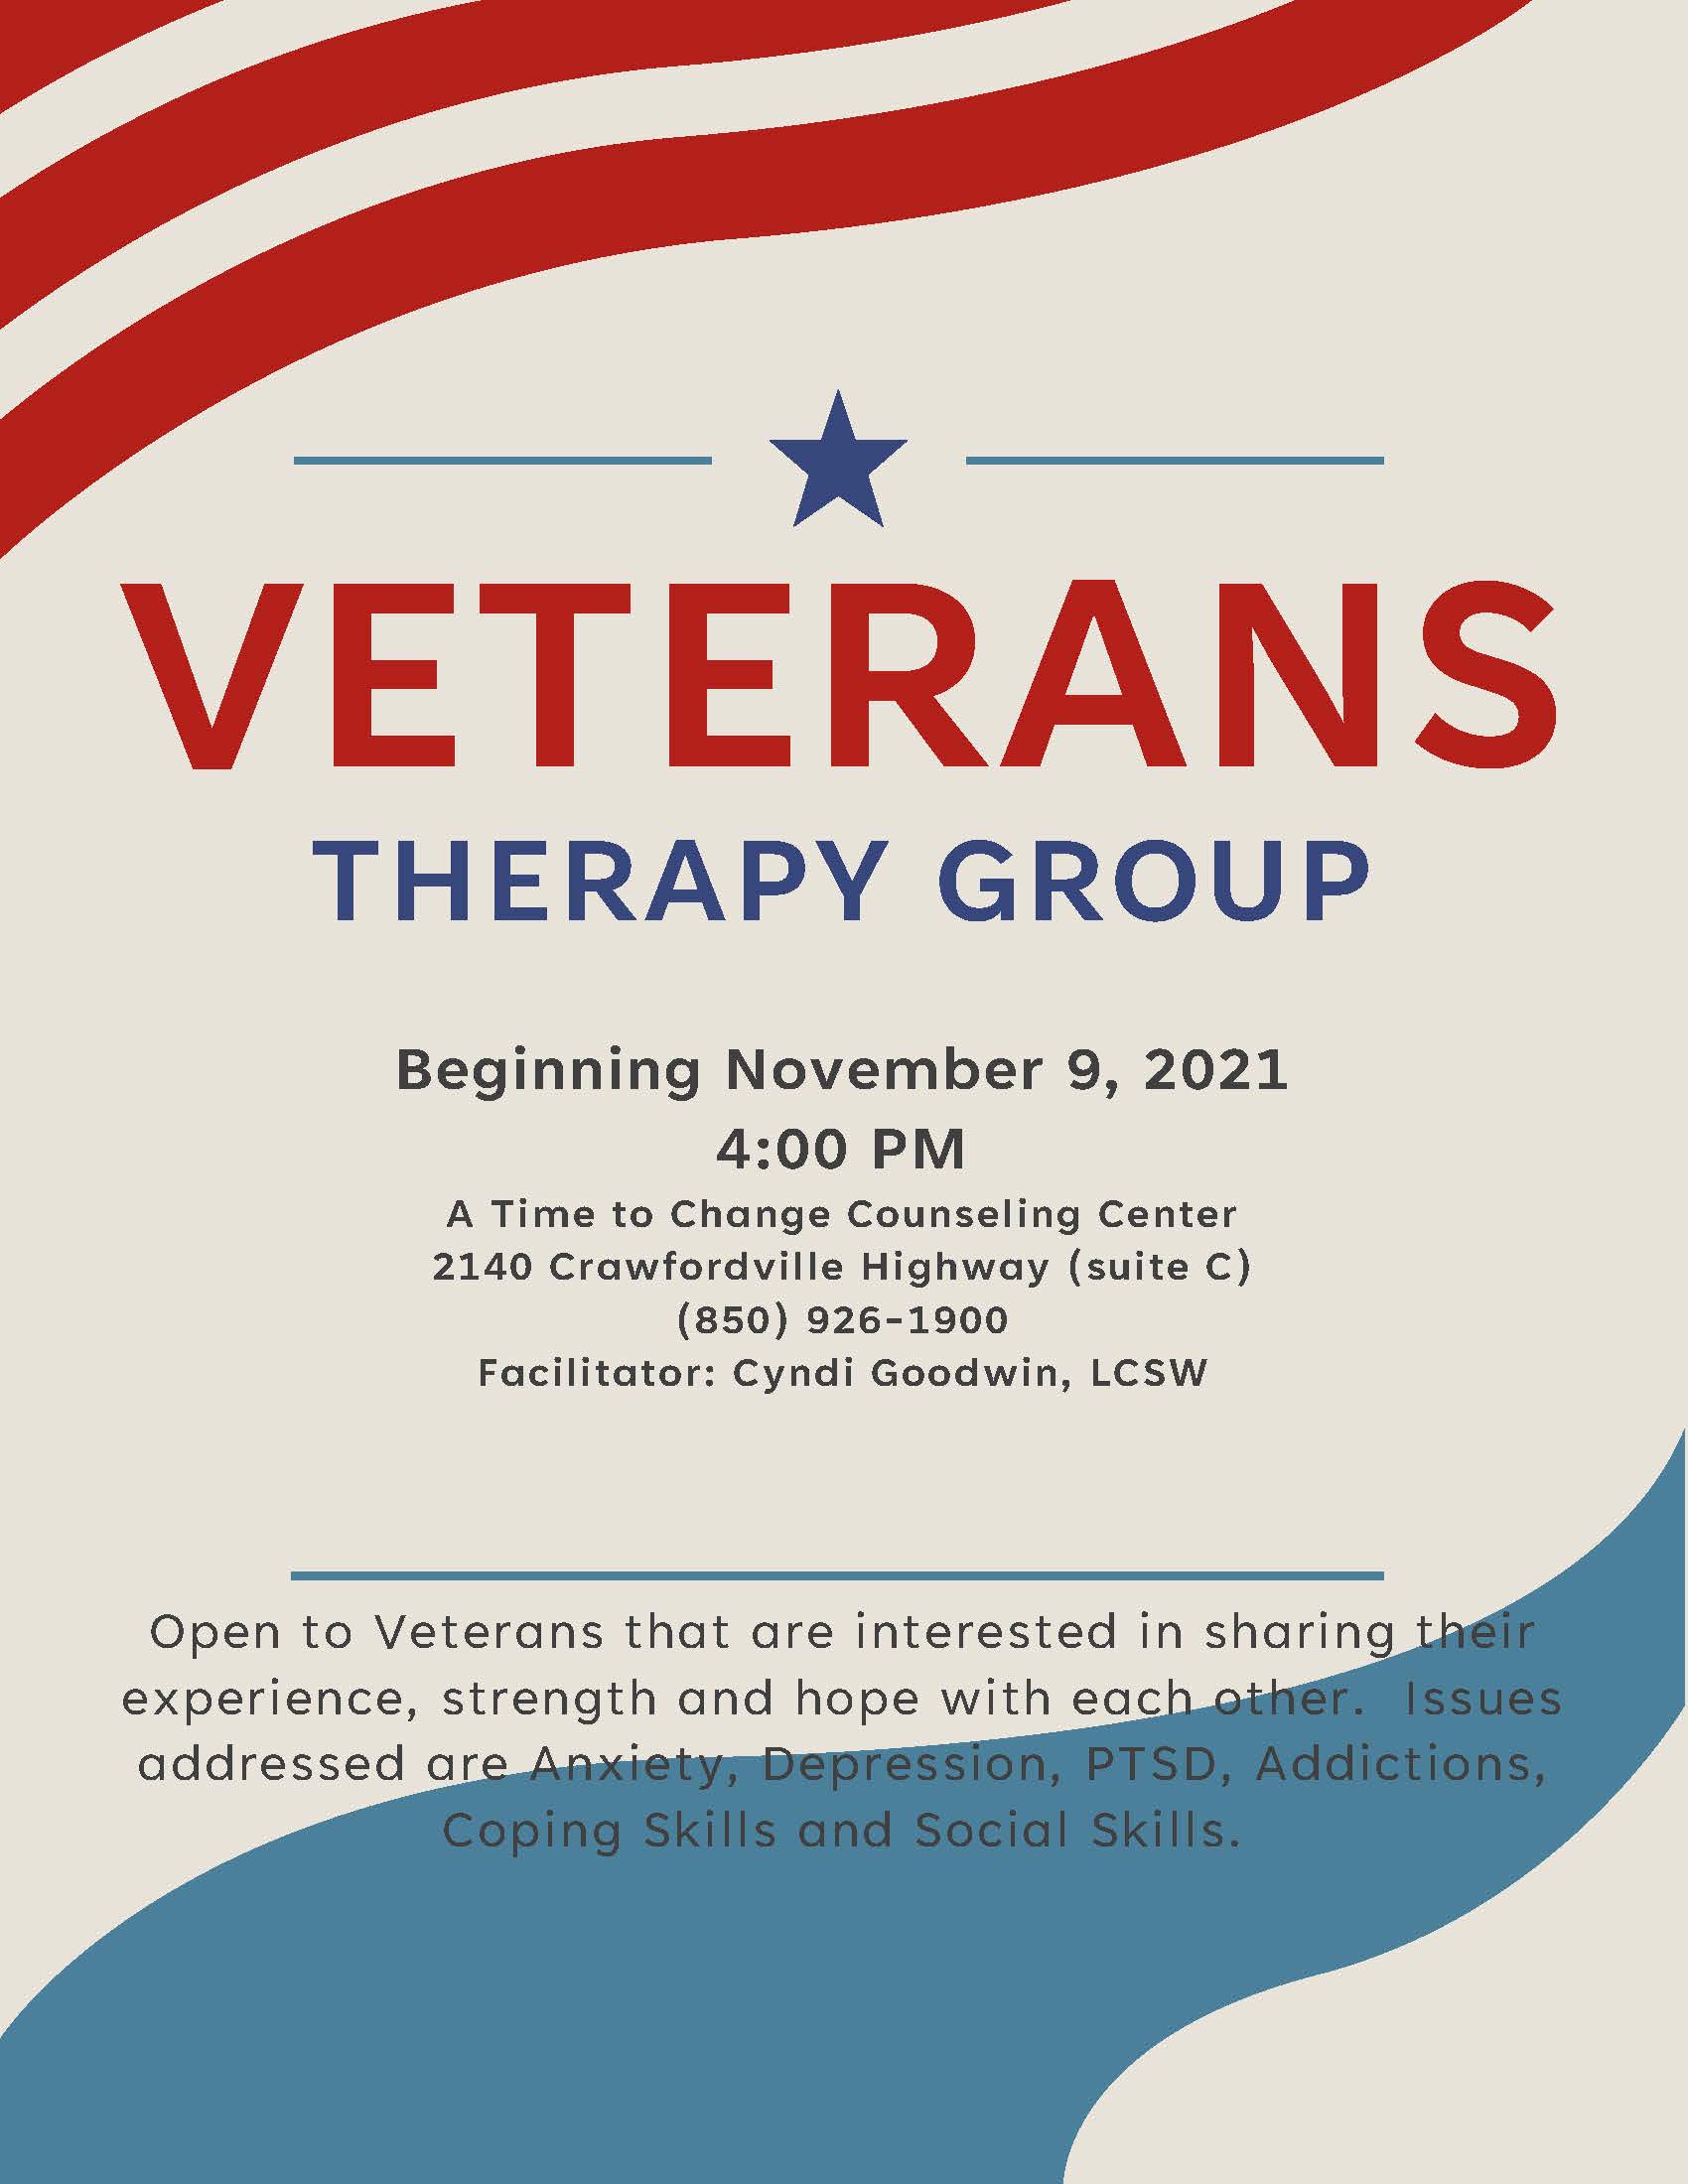 Veterans Therapy Group.A Time to Change Counseling Center